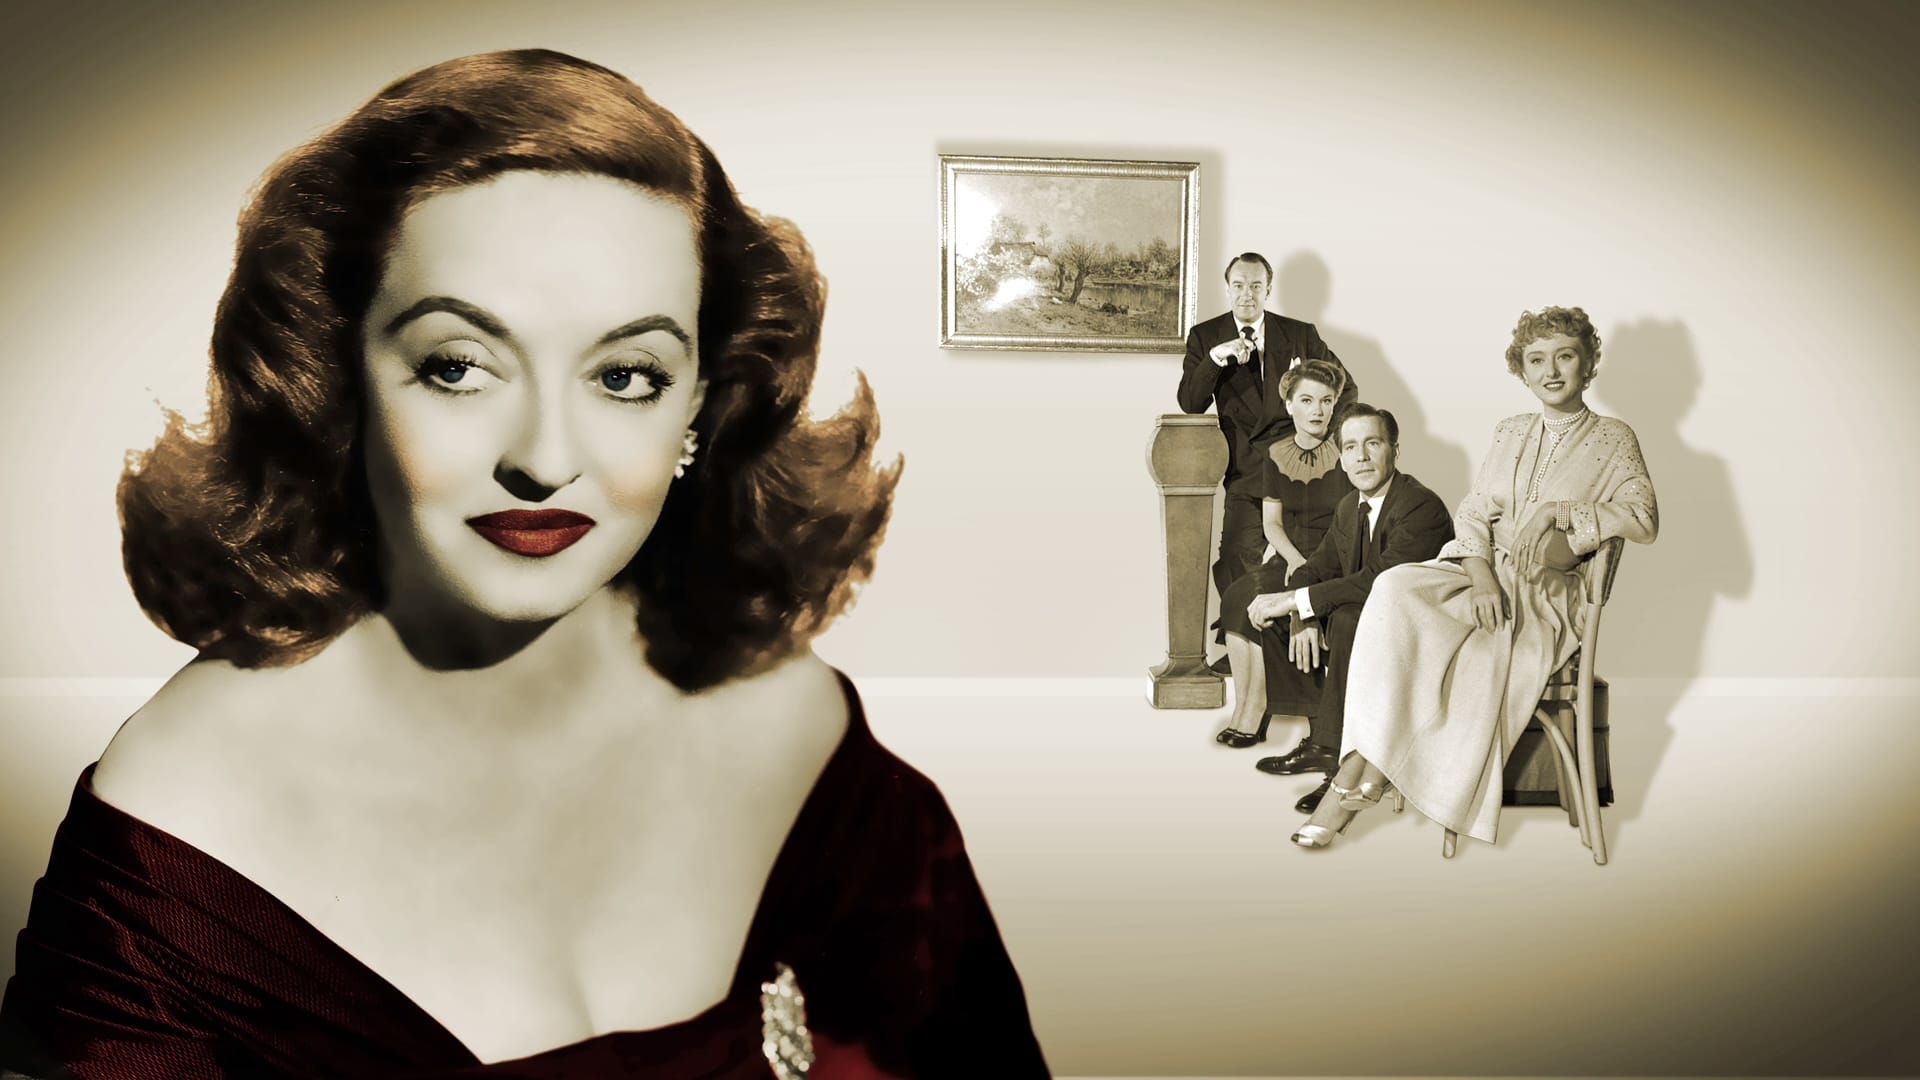 All About Eve background